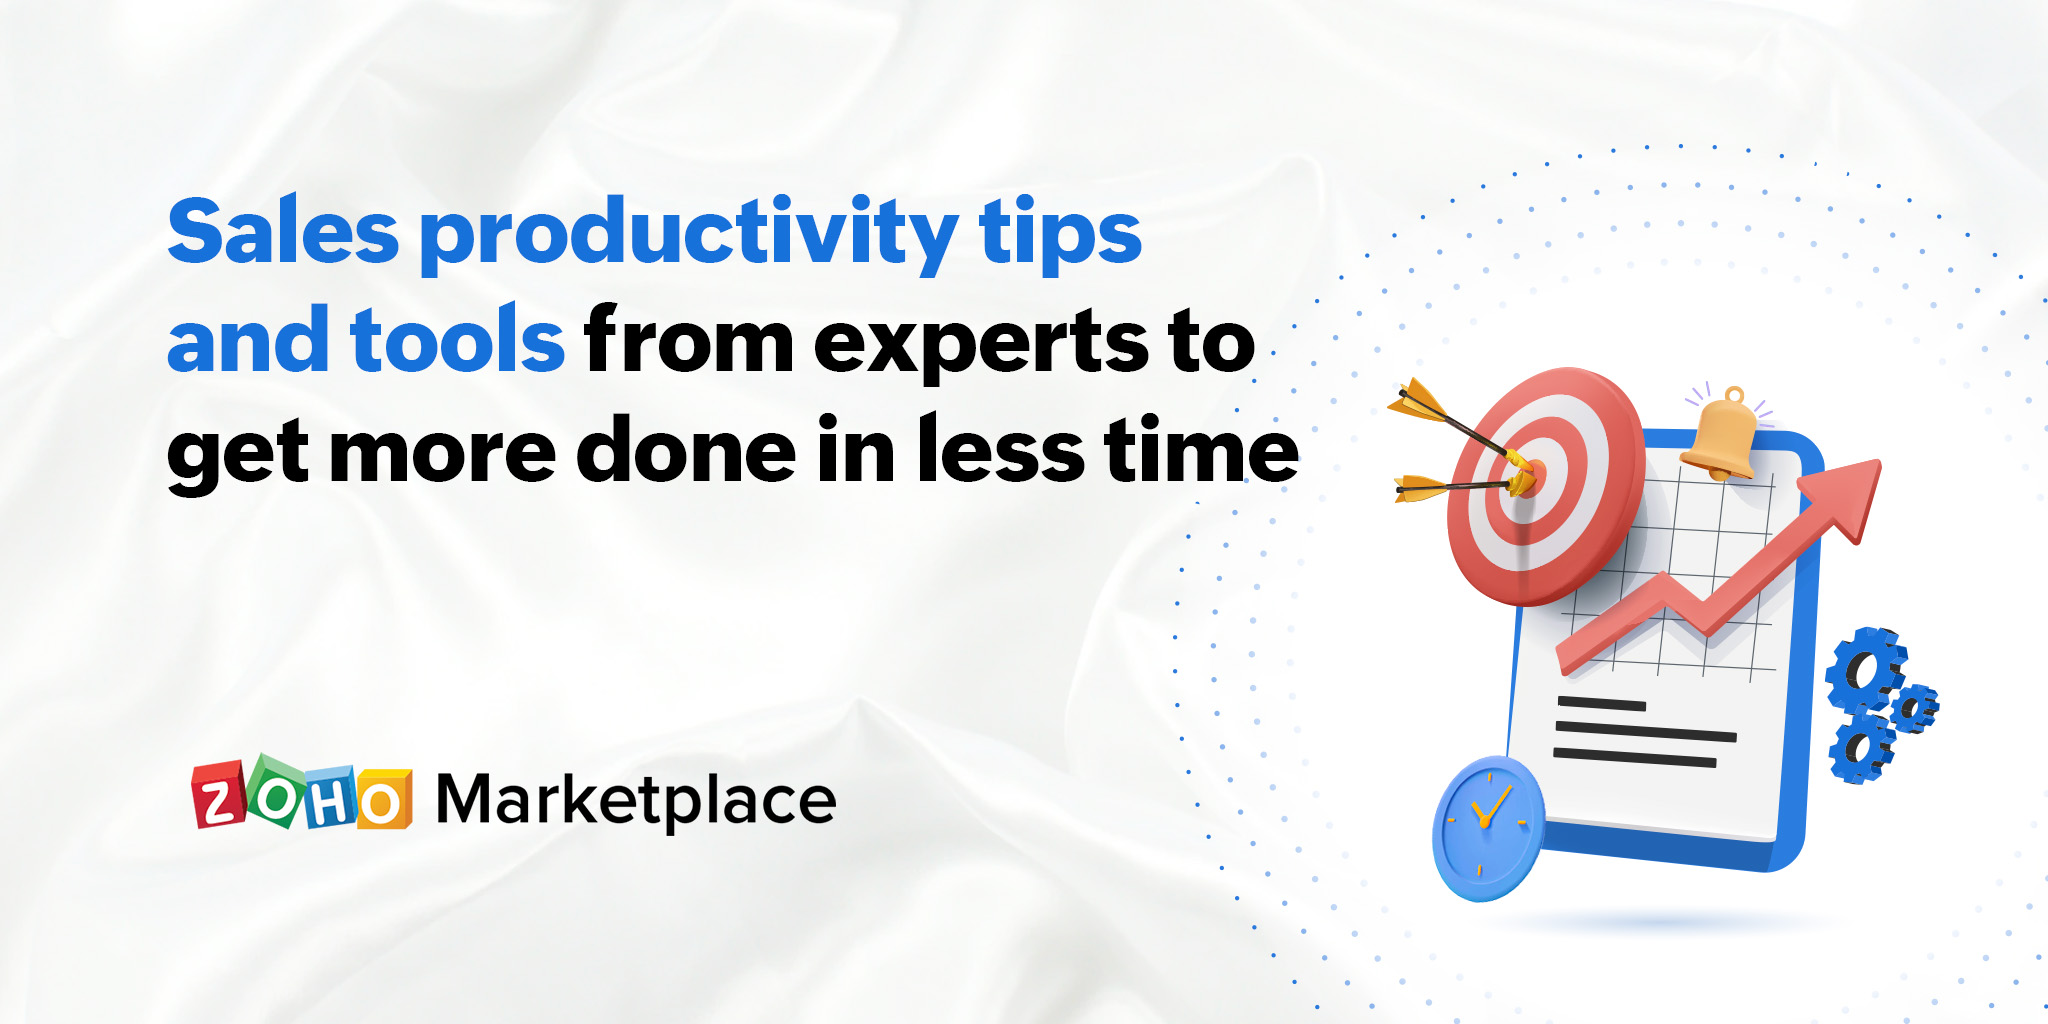 Sales productivity tips and tools from experts to get more done in less time